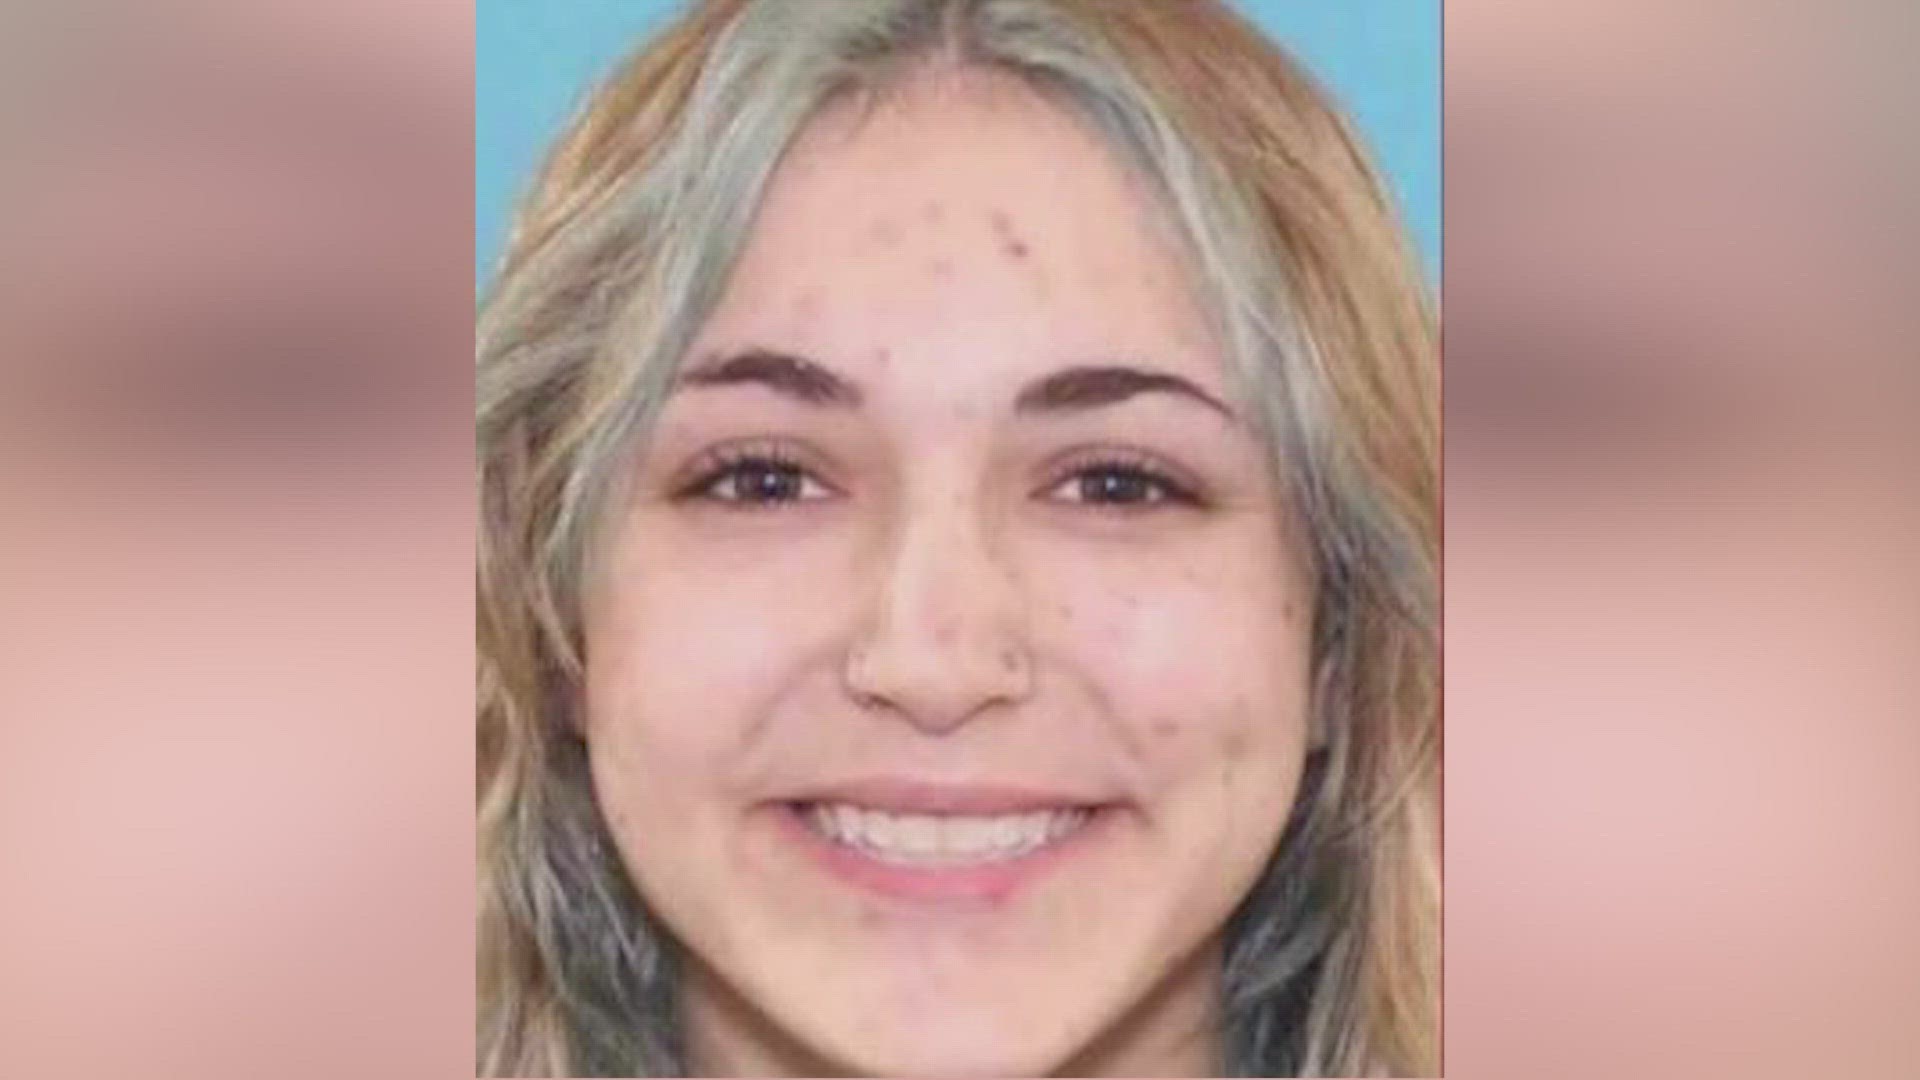 Police said Alyssa left her home near East Park Street and Gupton Way Drive early Saturday morning and may be suffering from a medical emergency.